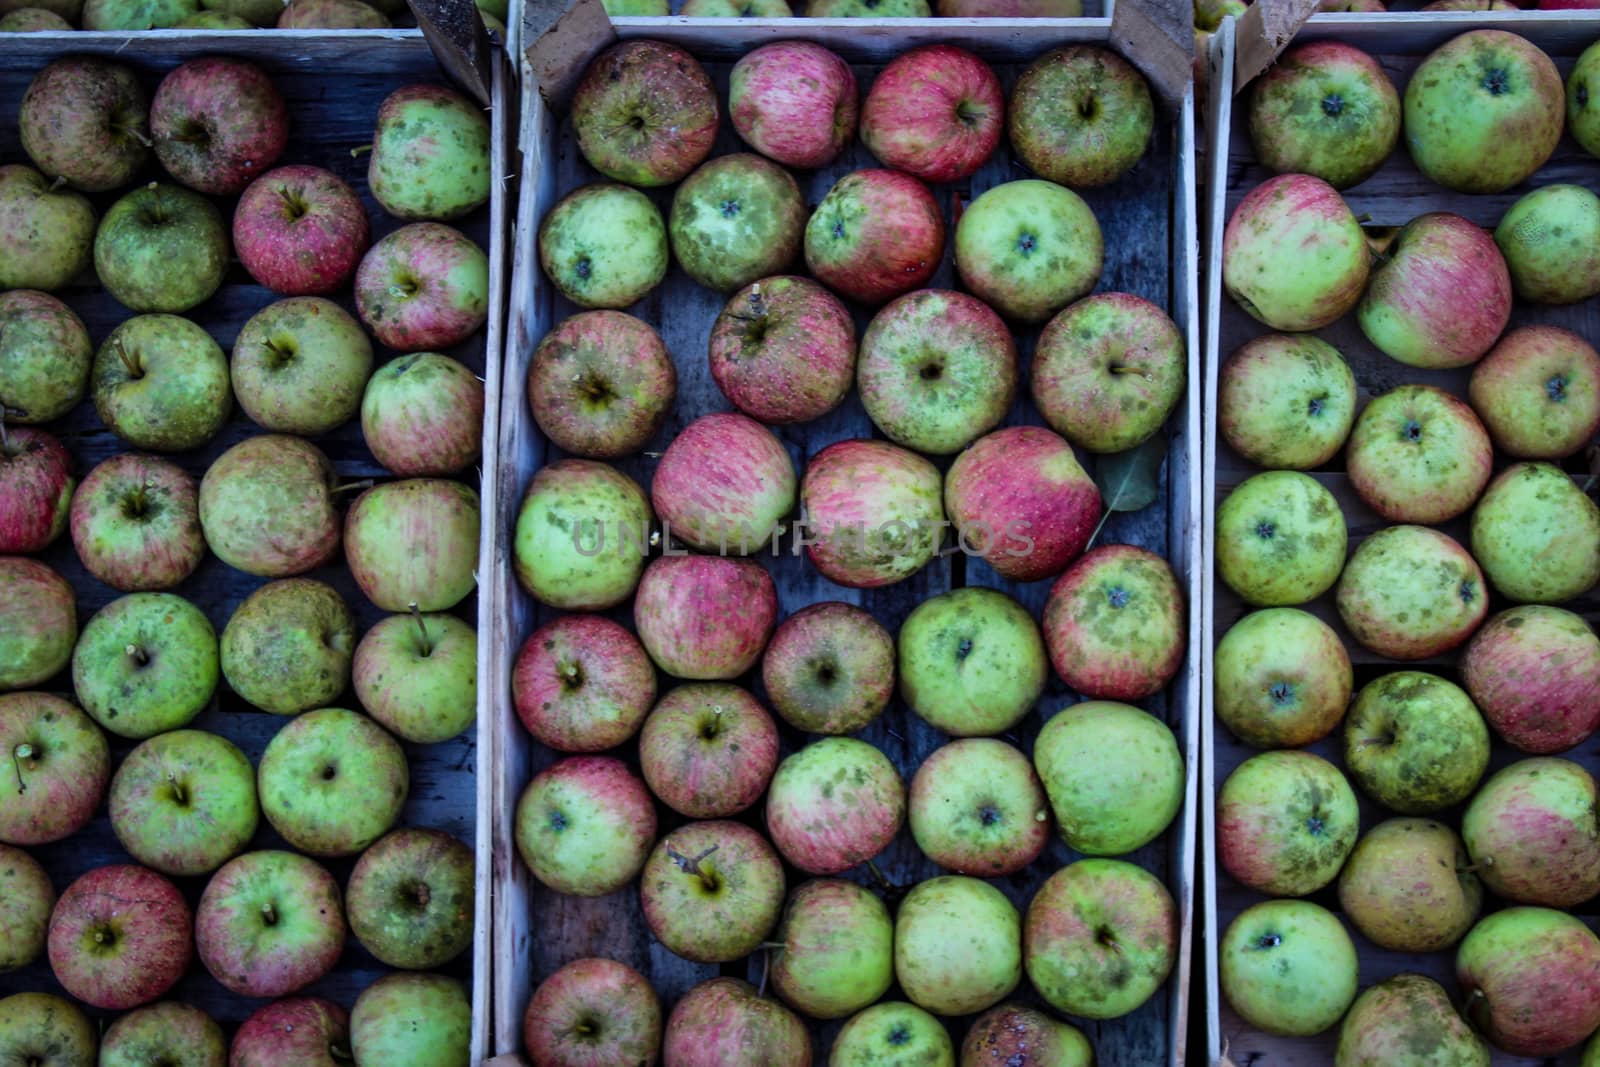 Homegrown apples in the fall in the countryside. Apples perfectly stacked in a wooden crates.